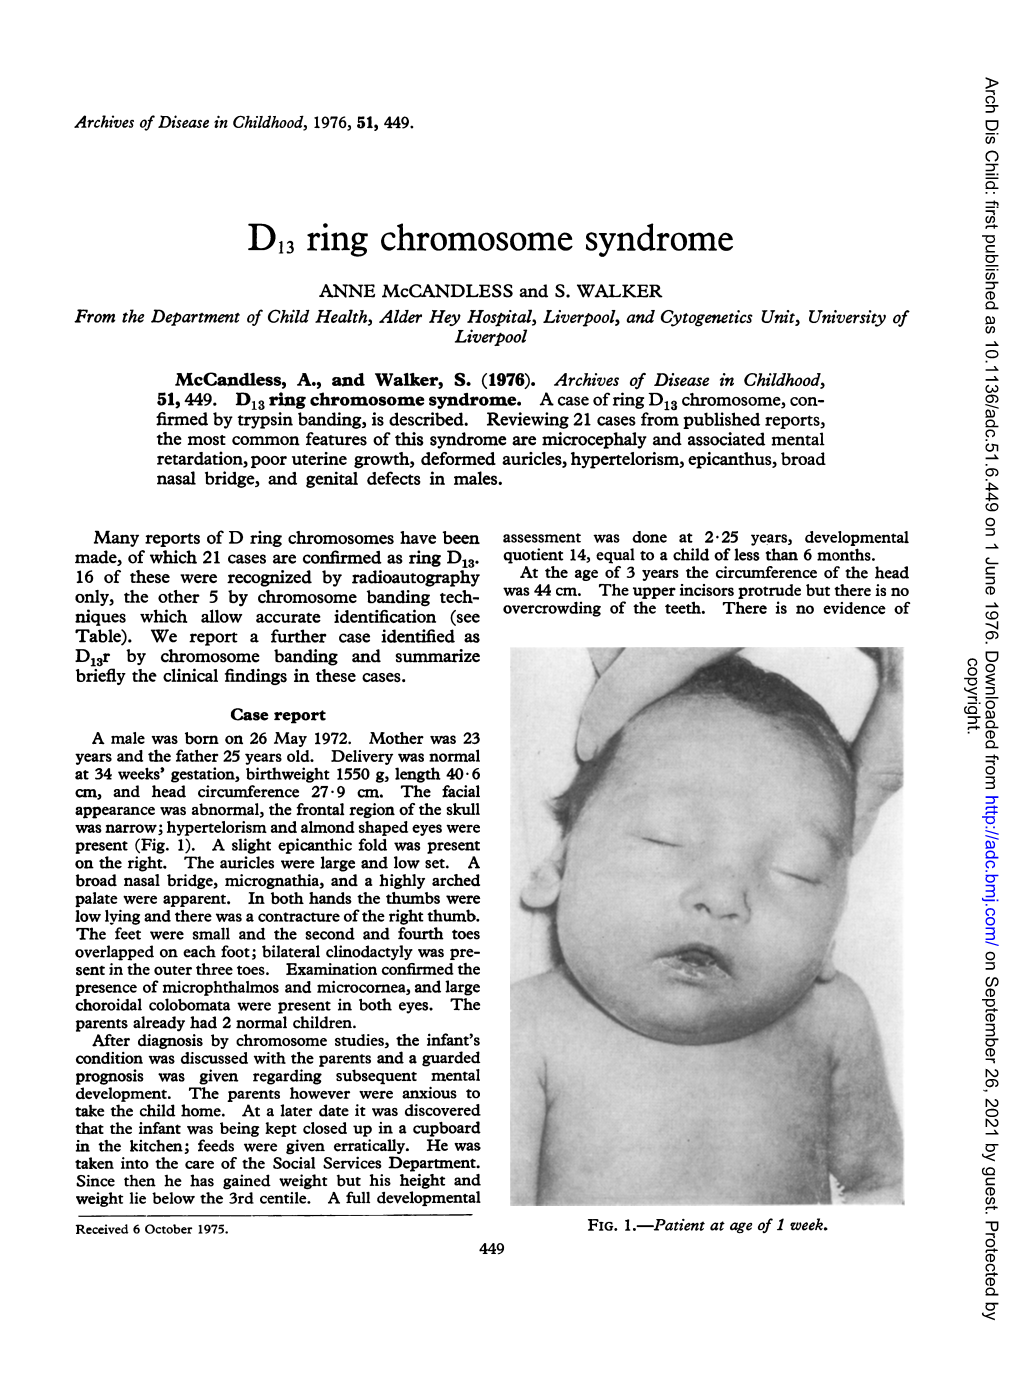 D13 Ring Chromosome Syndrome ANNE Mccandless and S